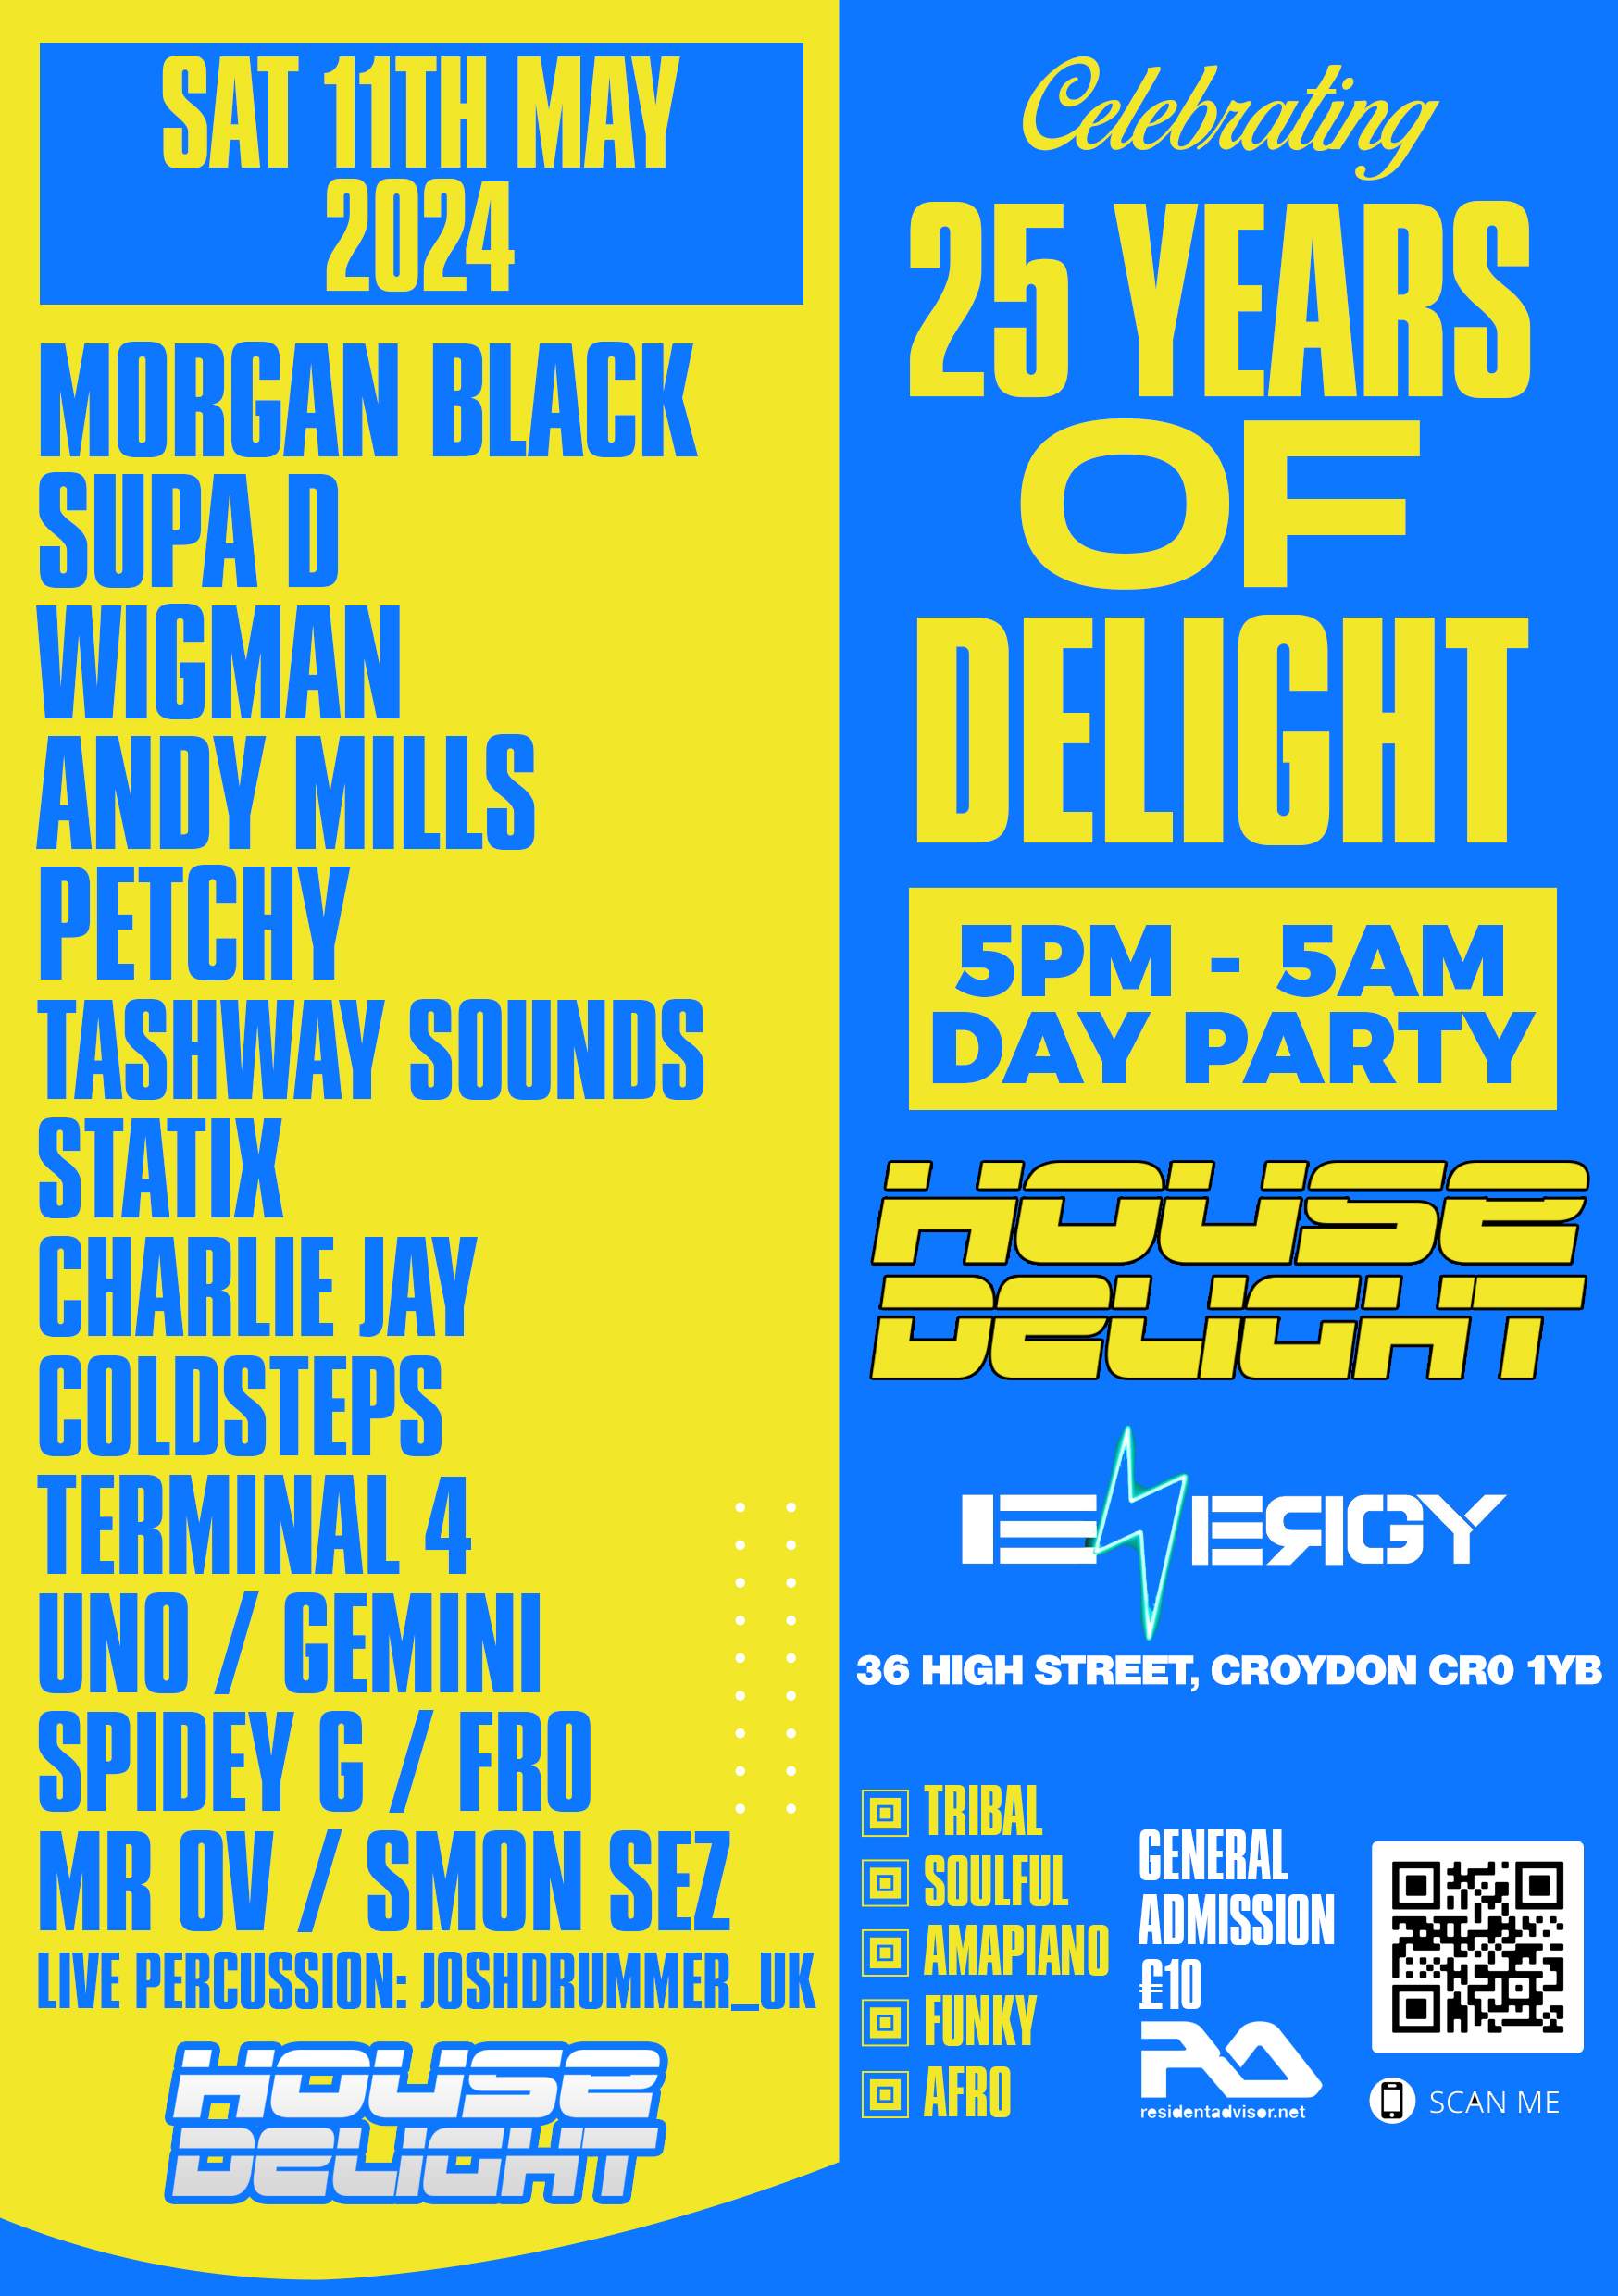 HOUSE DELIGHT (Day & Night Party - 5pm - 5am) - フライヤー裏